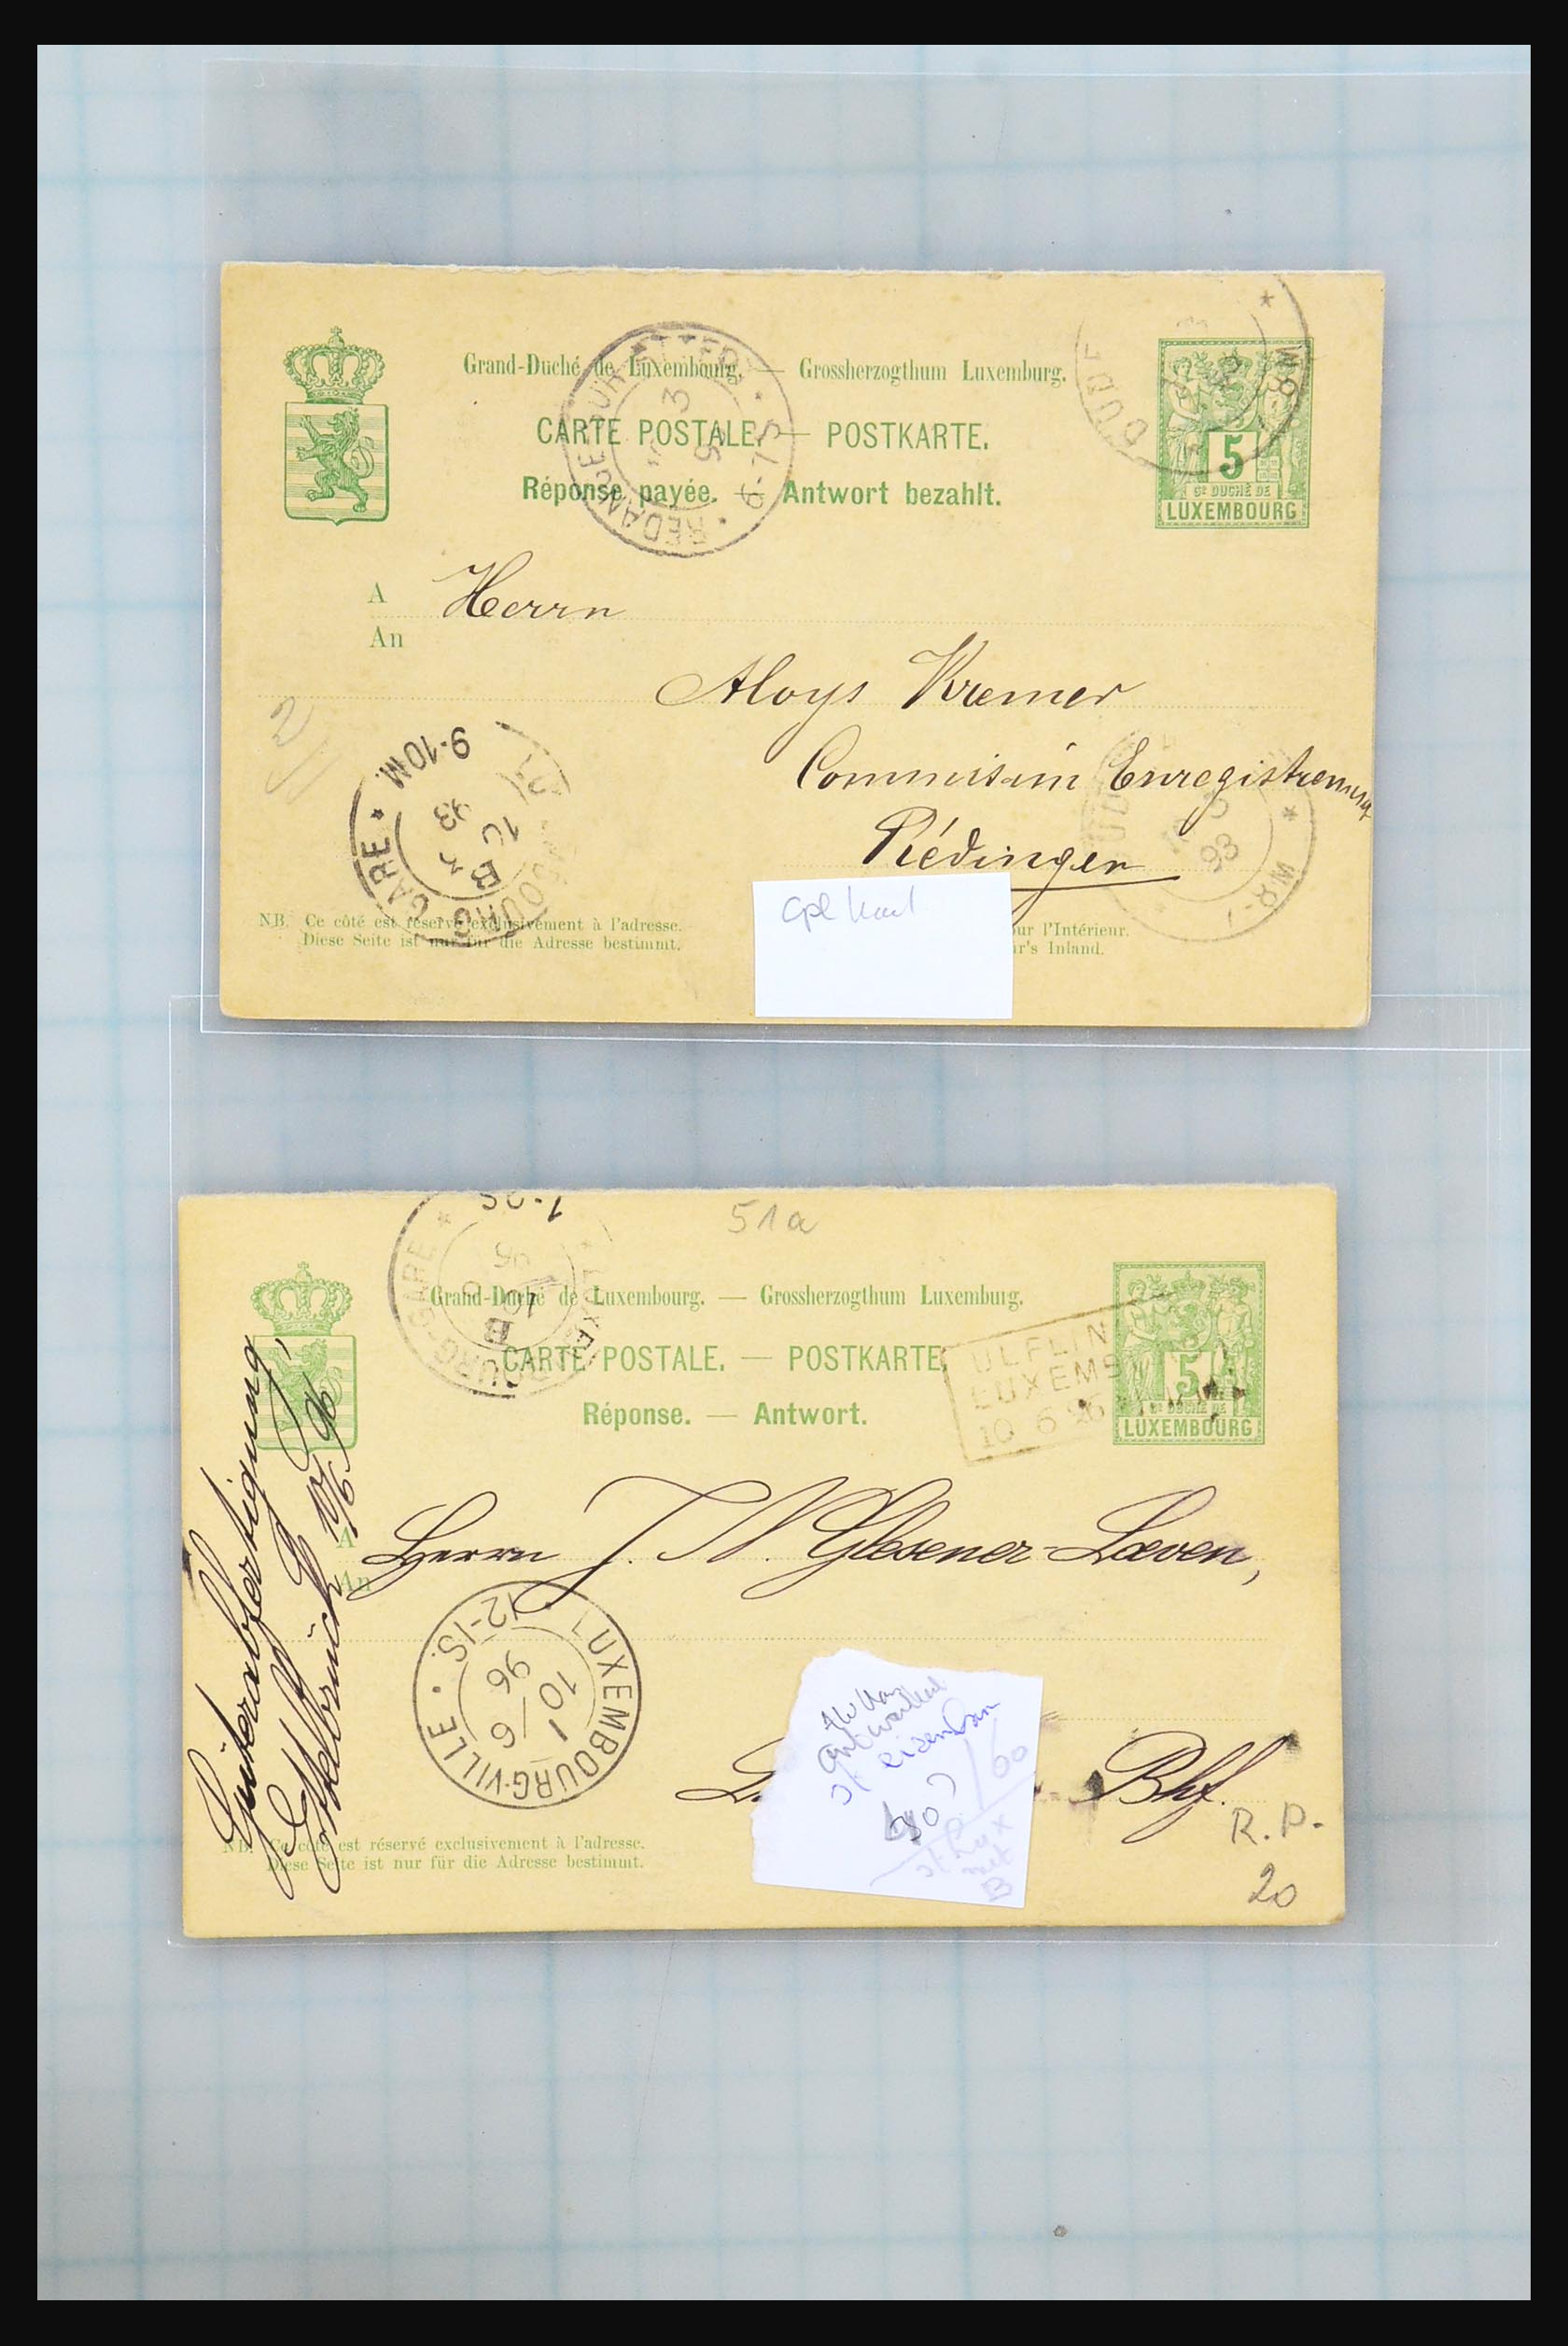 31358 050 - 31358 Portugal/Luxemburg/Greece covers 1880-1960.